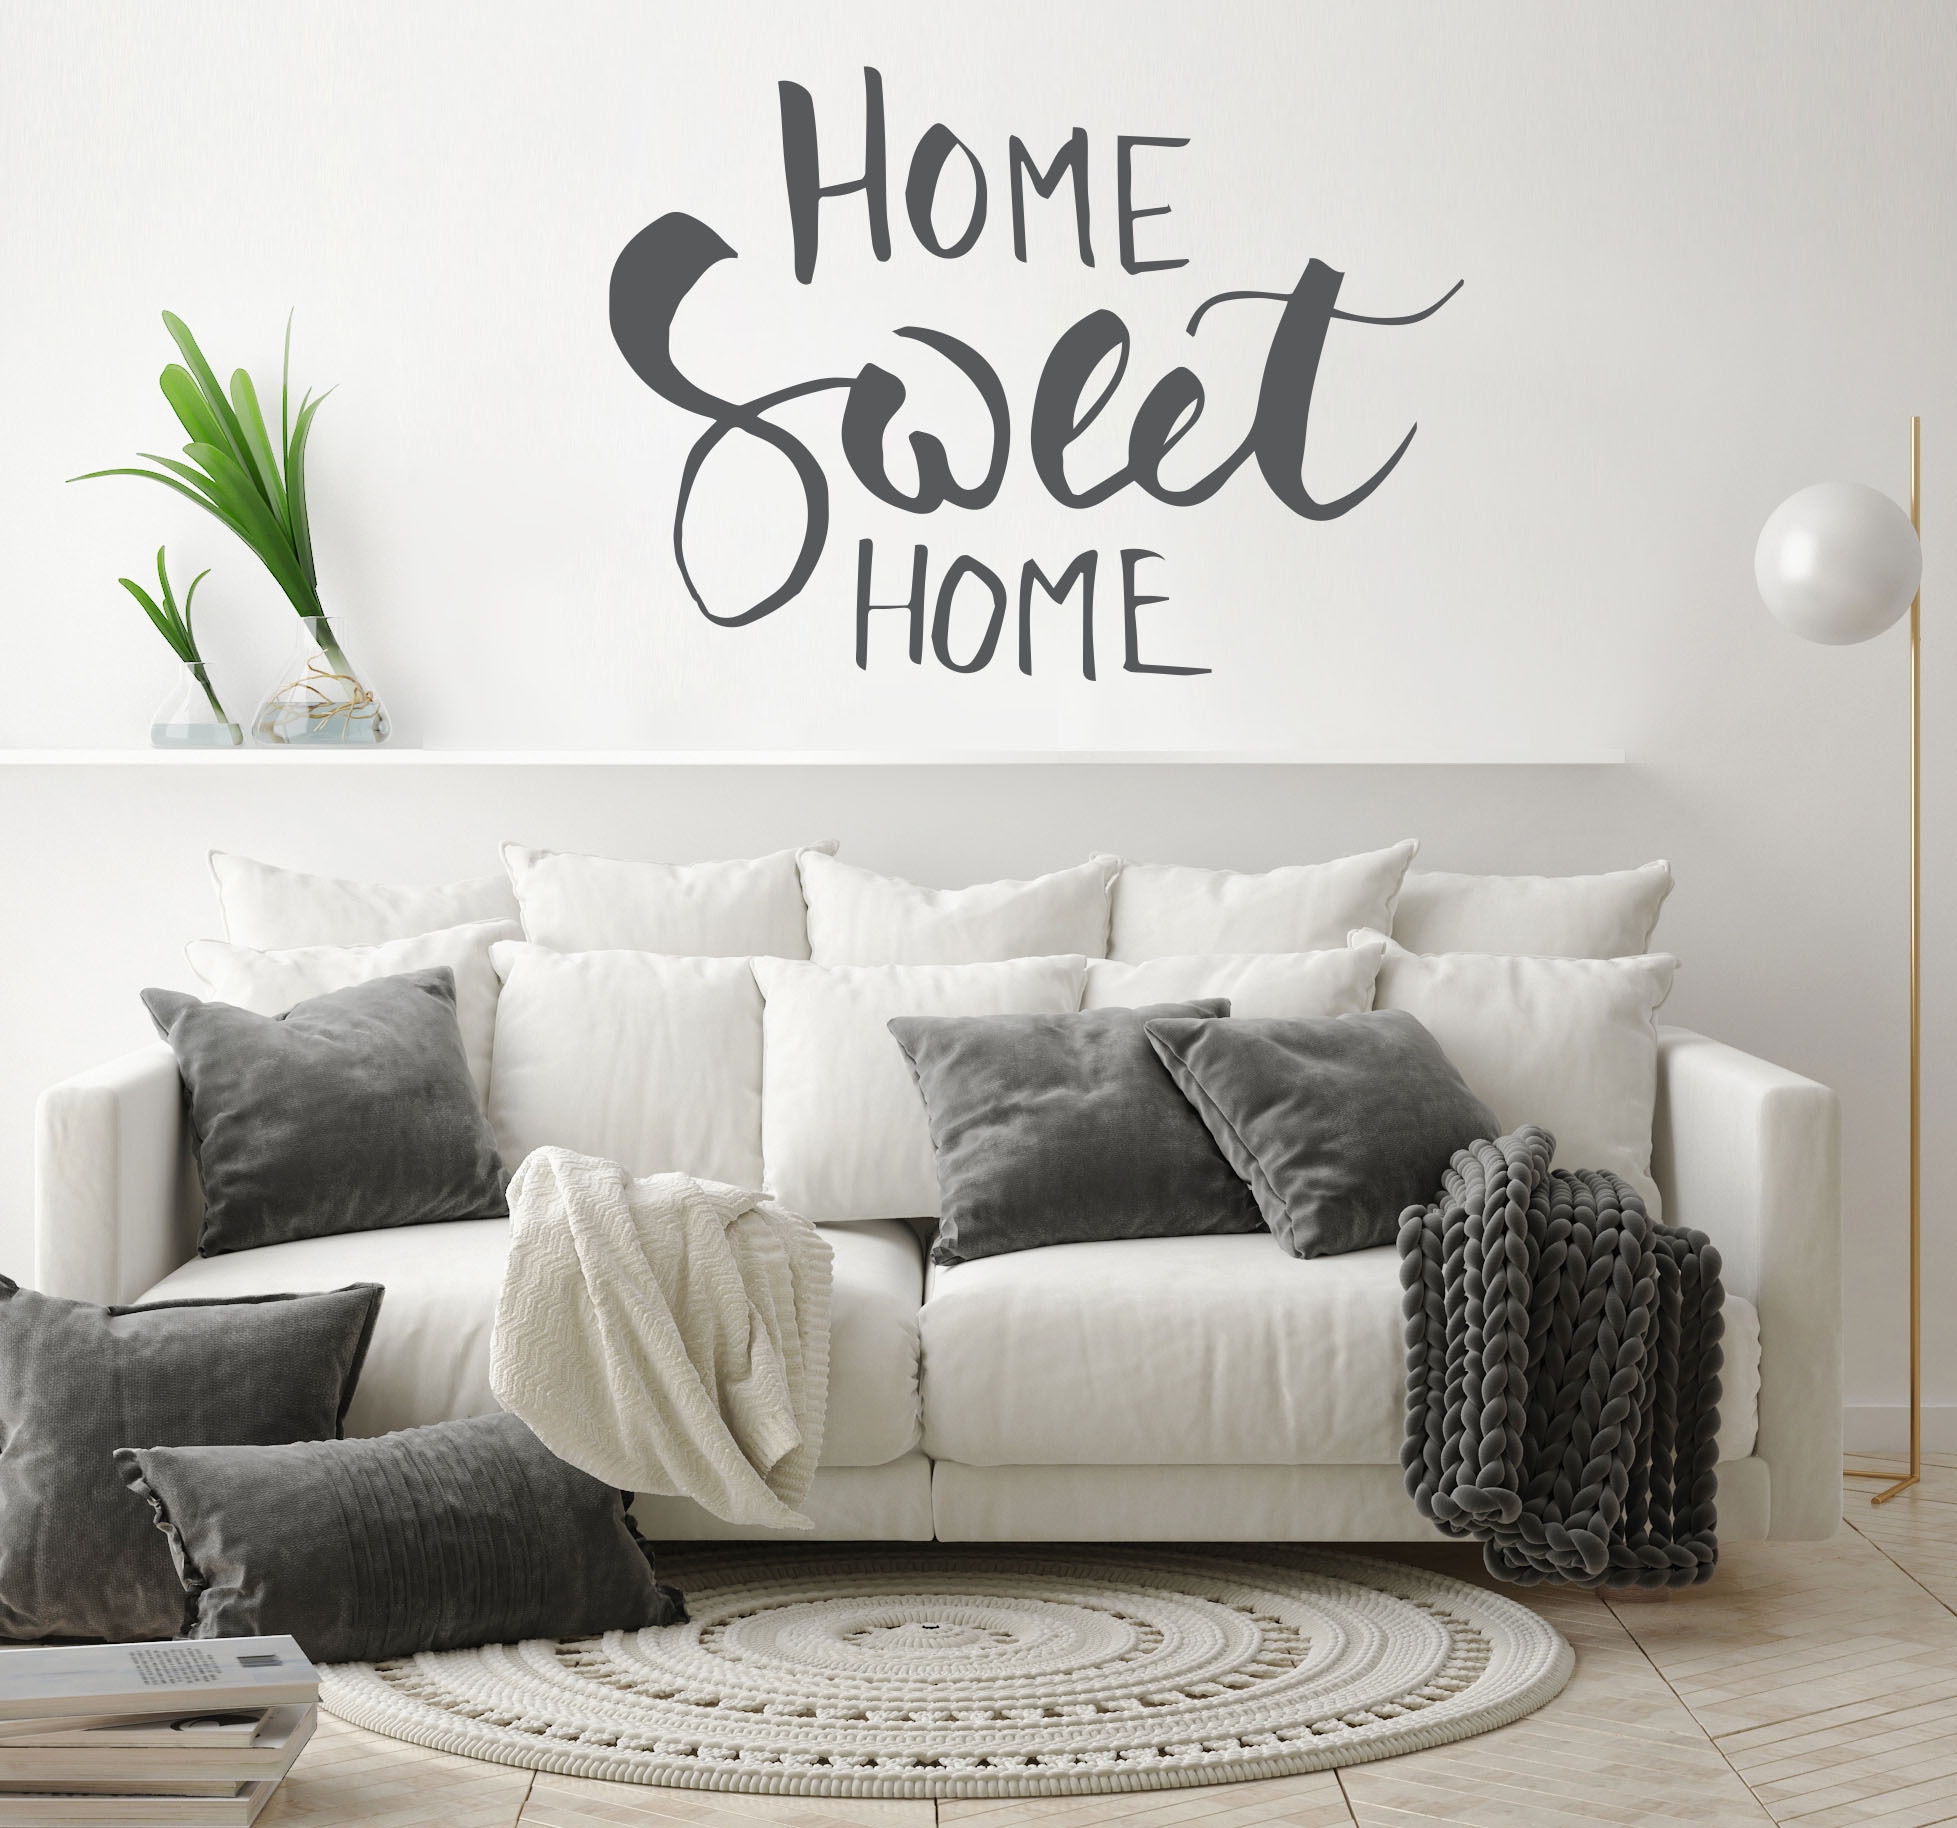 queence Wandtattoo »HOME SWEET HOME«, (1 St.) online bei OTTO